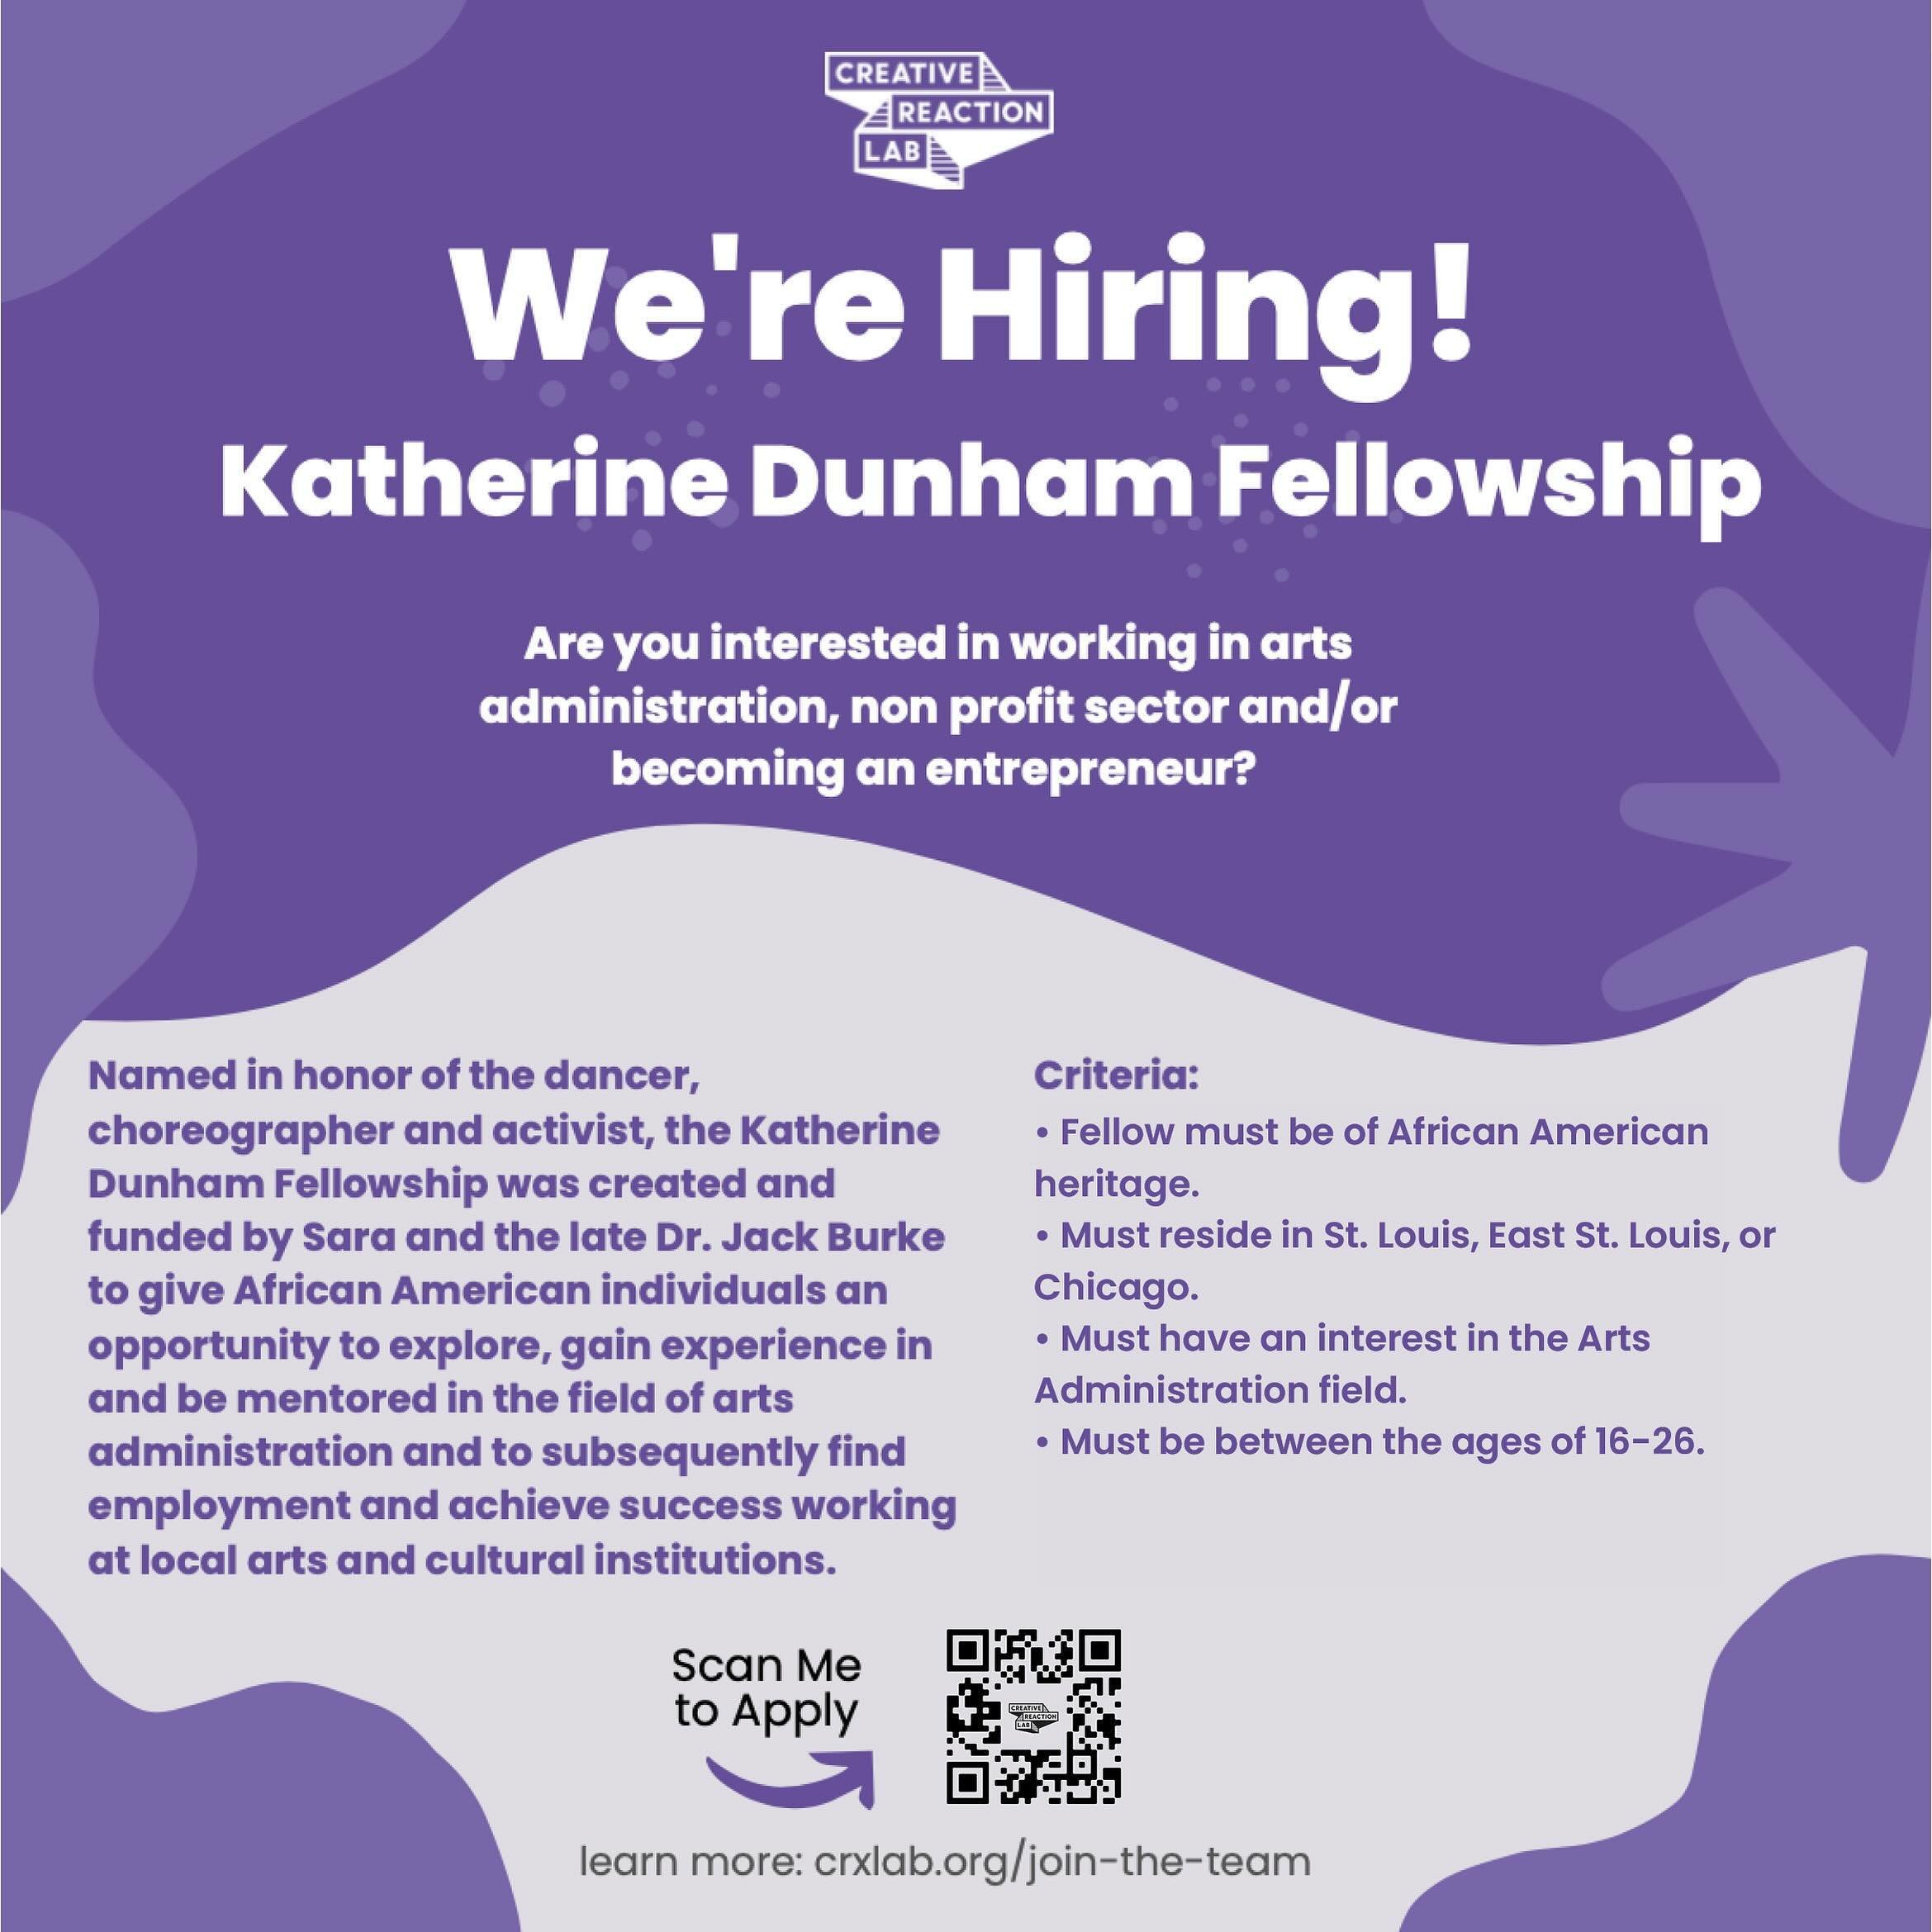 Are you interested in working in the art administration, non profit sector or becoming an entrepreneur?

CRXLAB is hiring a Summer Fellow/Intern! Named in honor of the legendary dancer, choreographer and activist, the Katherine Dunham Fellowship was 